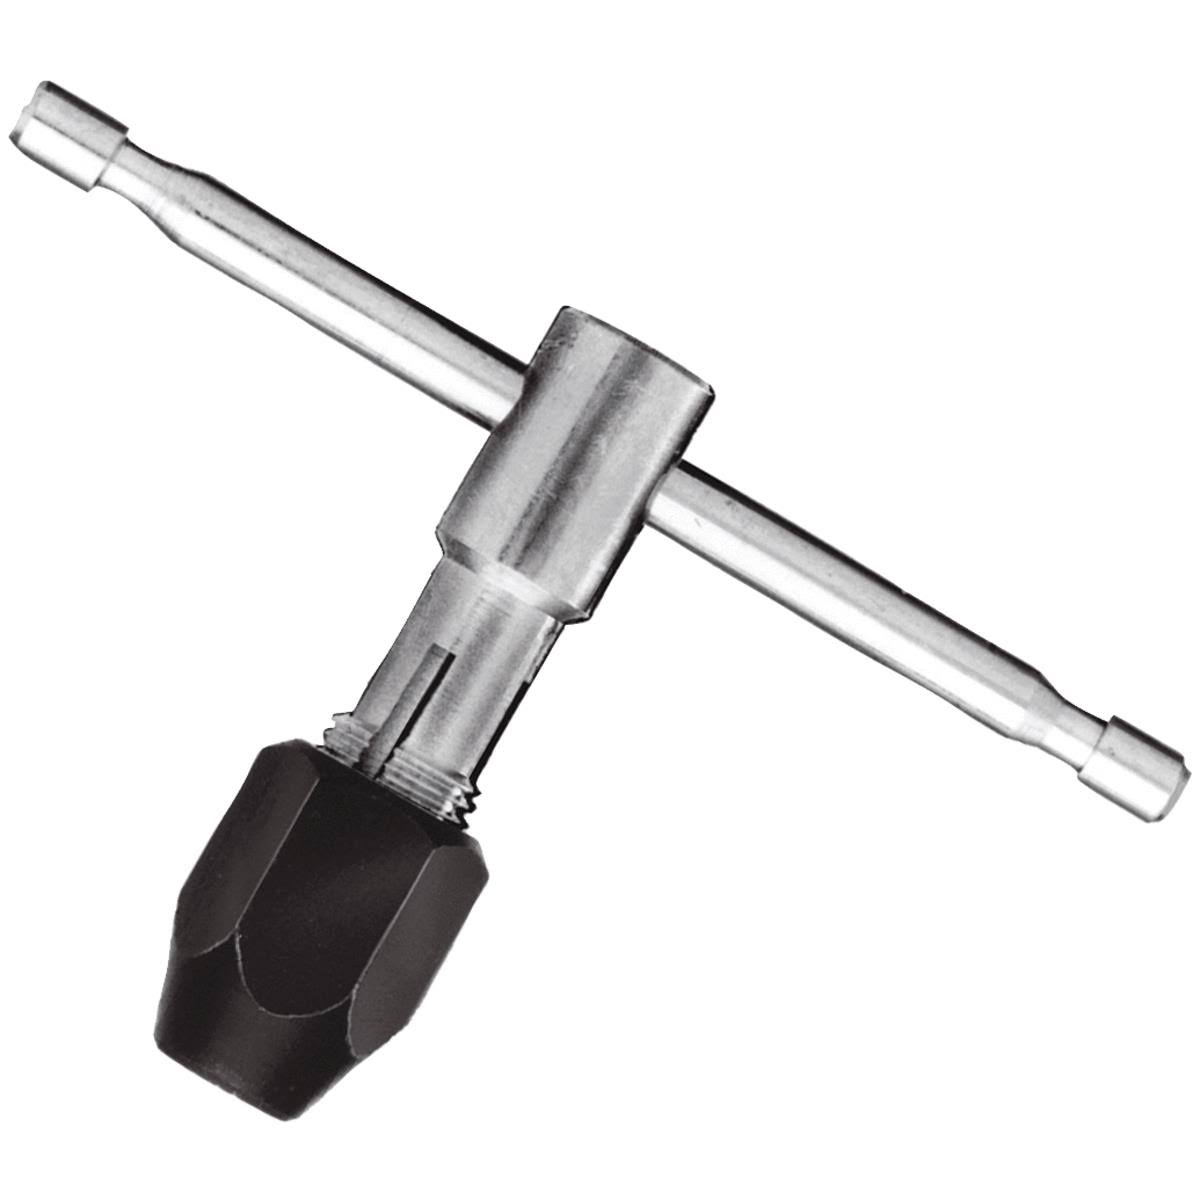 Irwin Tools T-Handle Tap Wrench